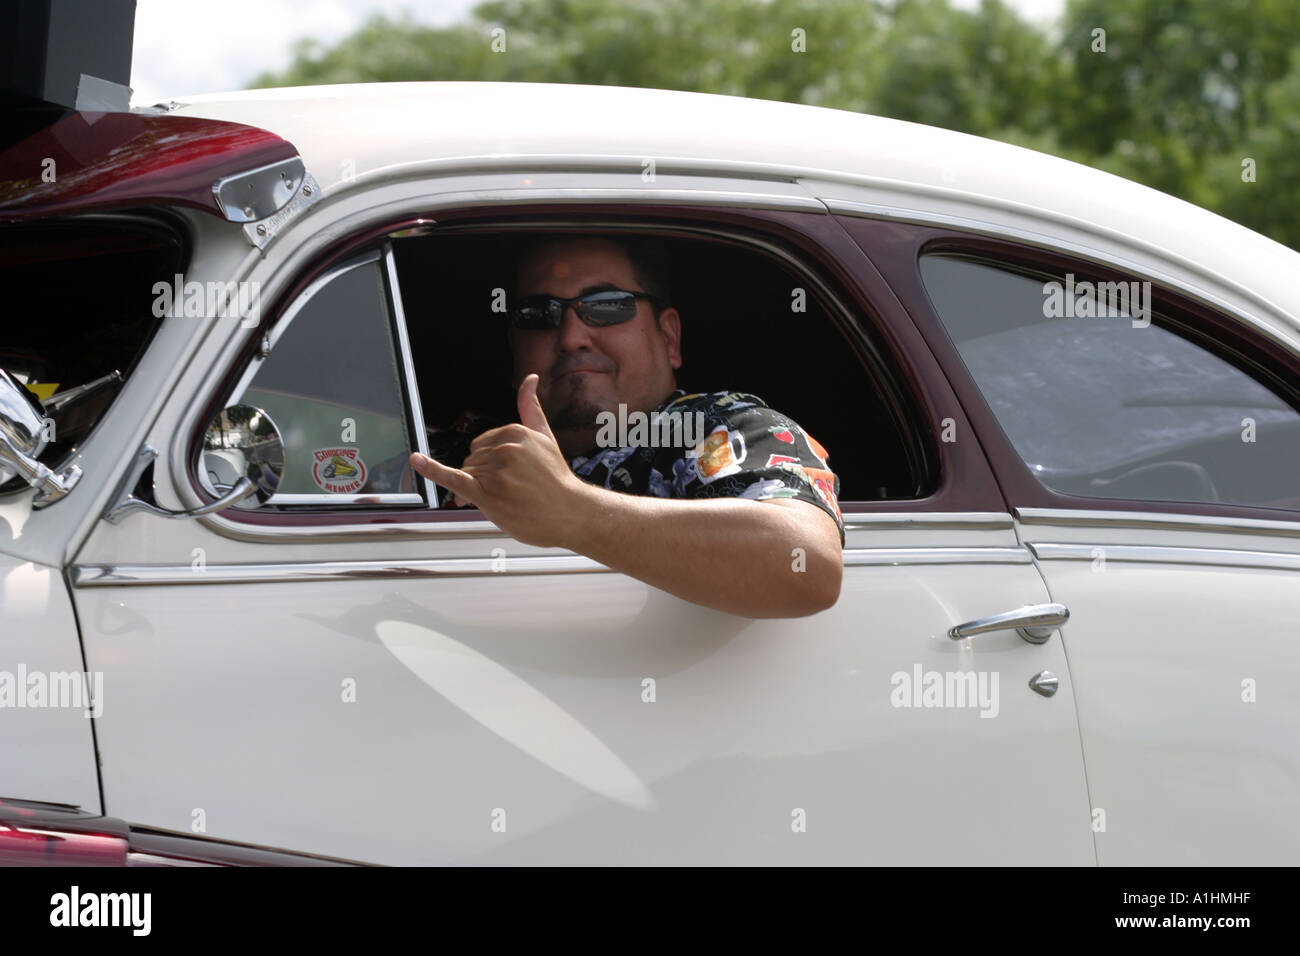 Man driving looking out of a classic old car window giving the thumbs up sign Stock Photo